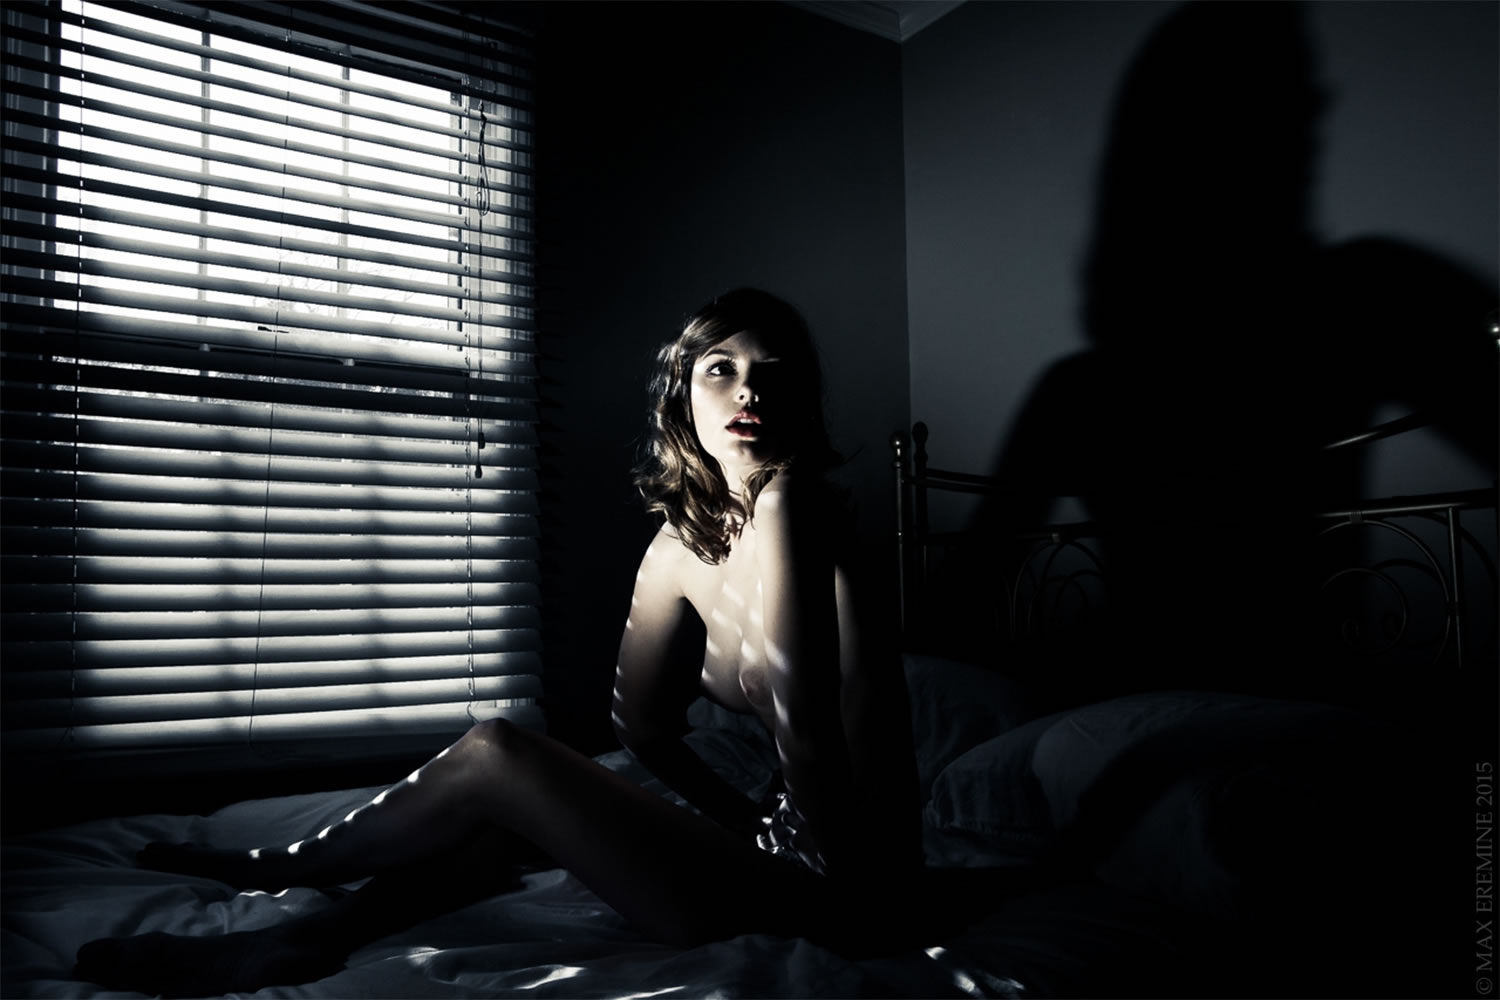 shadows from blinds, woman in dark room, photography by max eremine 